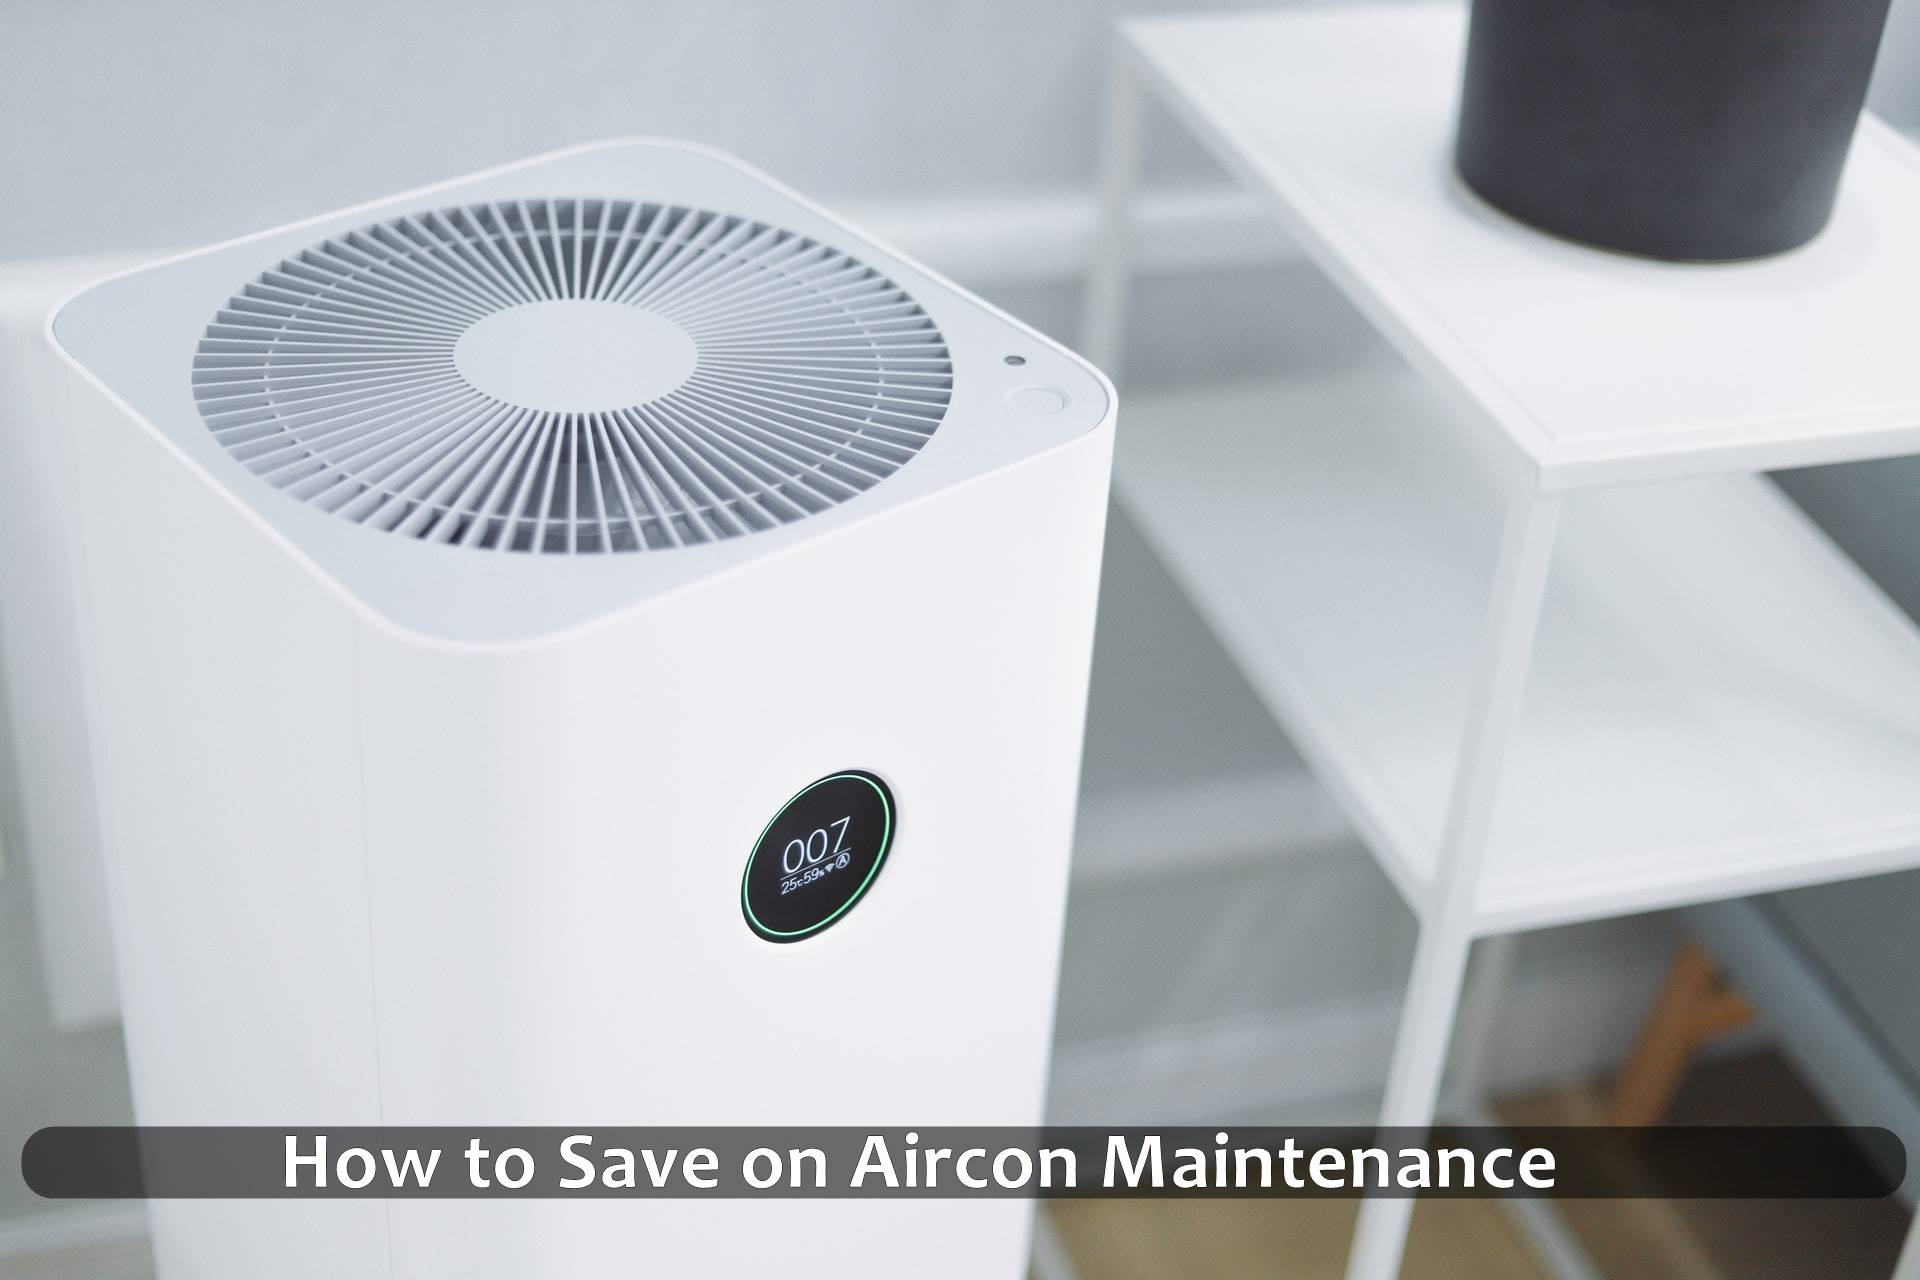 How to Save on Aircon Maintenance: A guide to saving money on maintenance fees